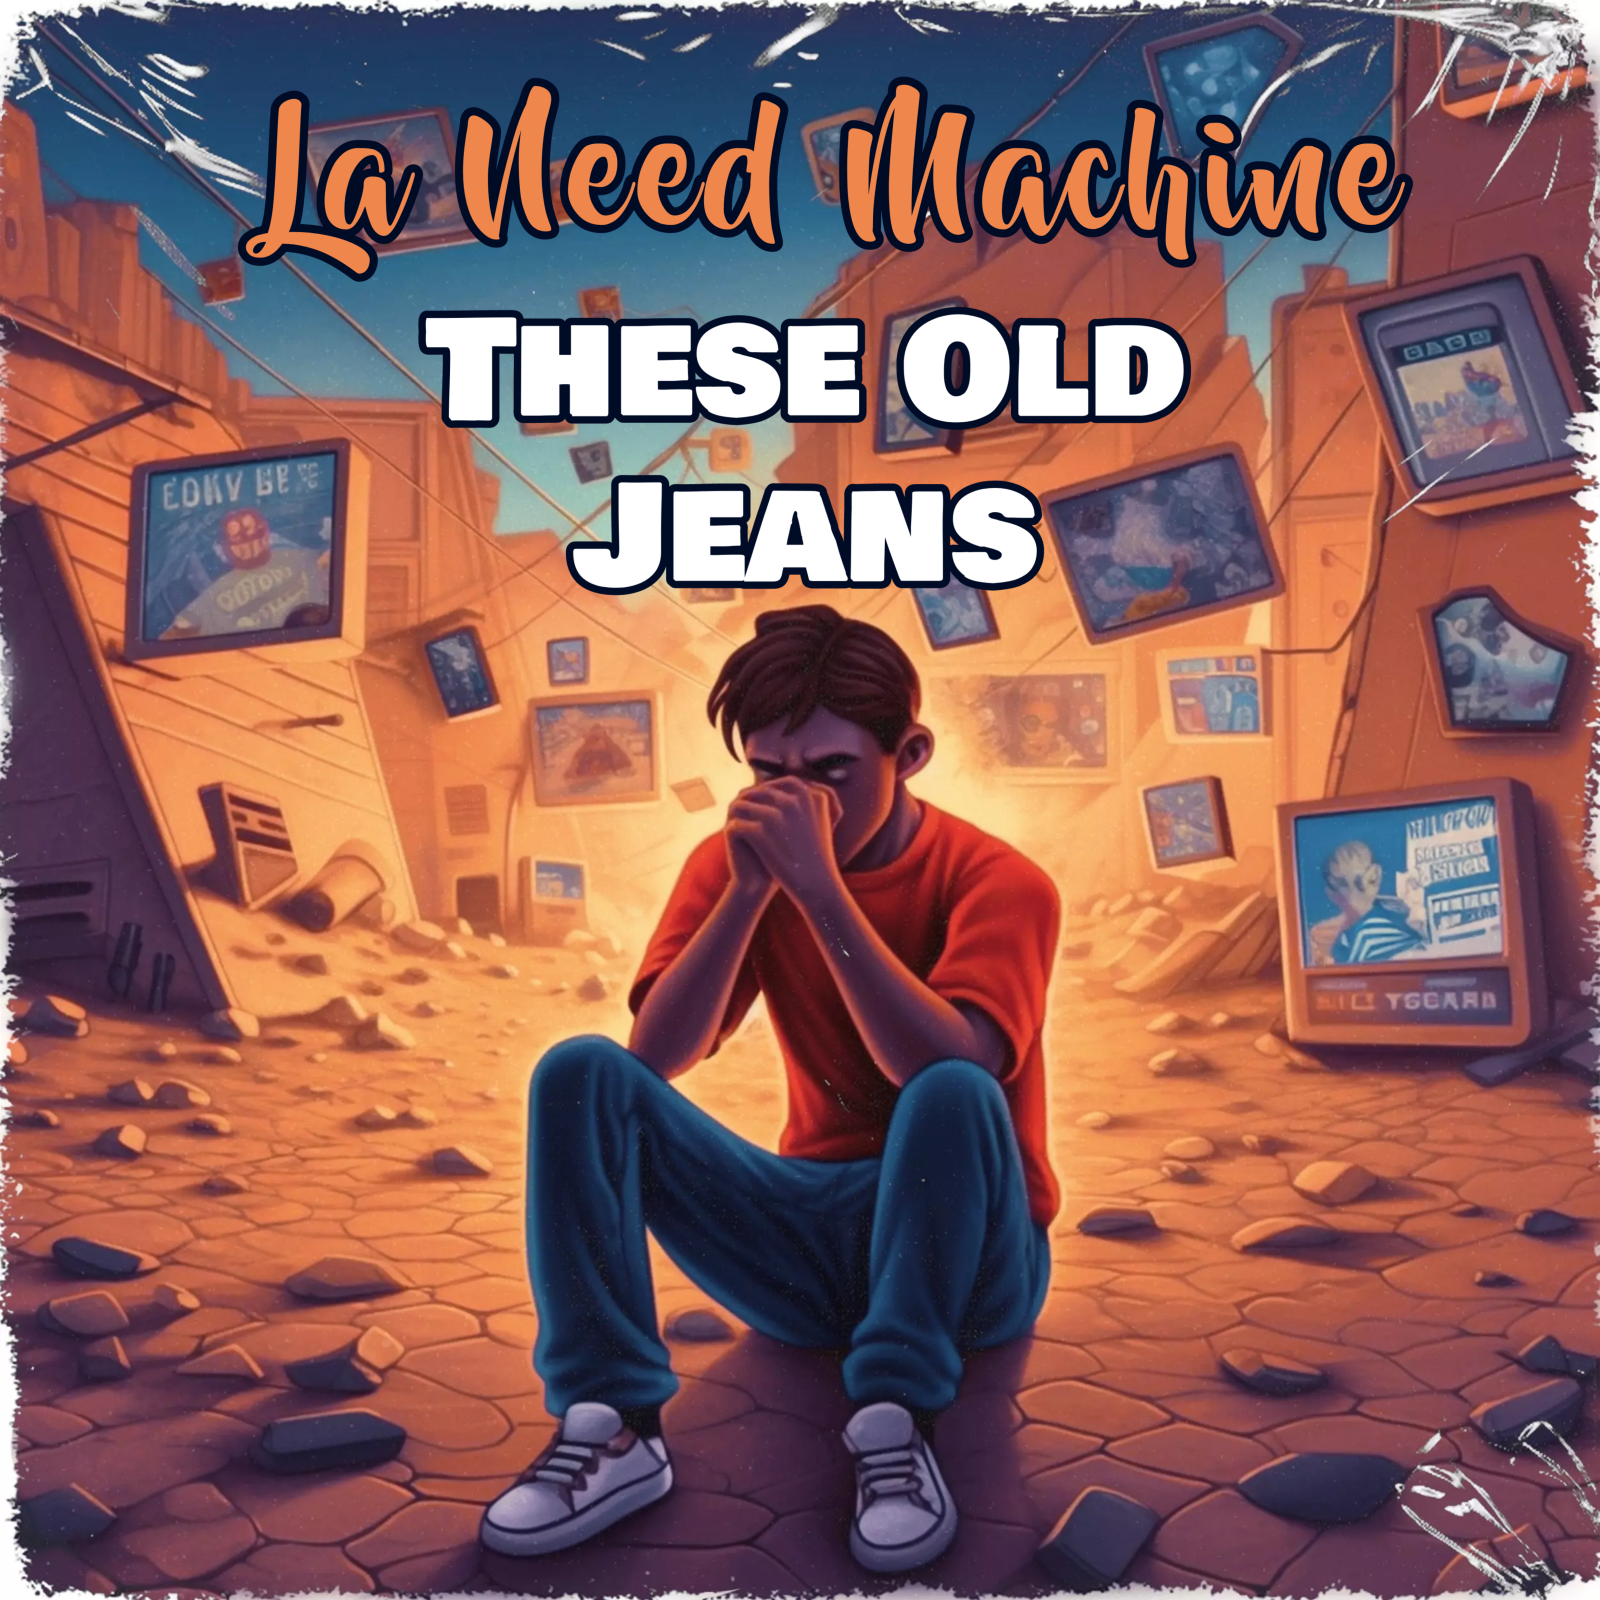 La Need Machine – “These Old Jeans”